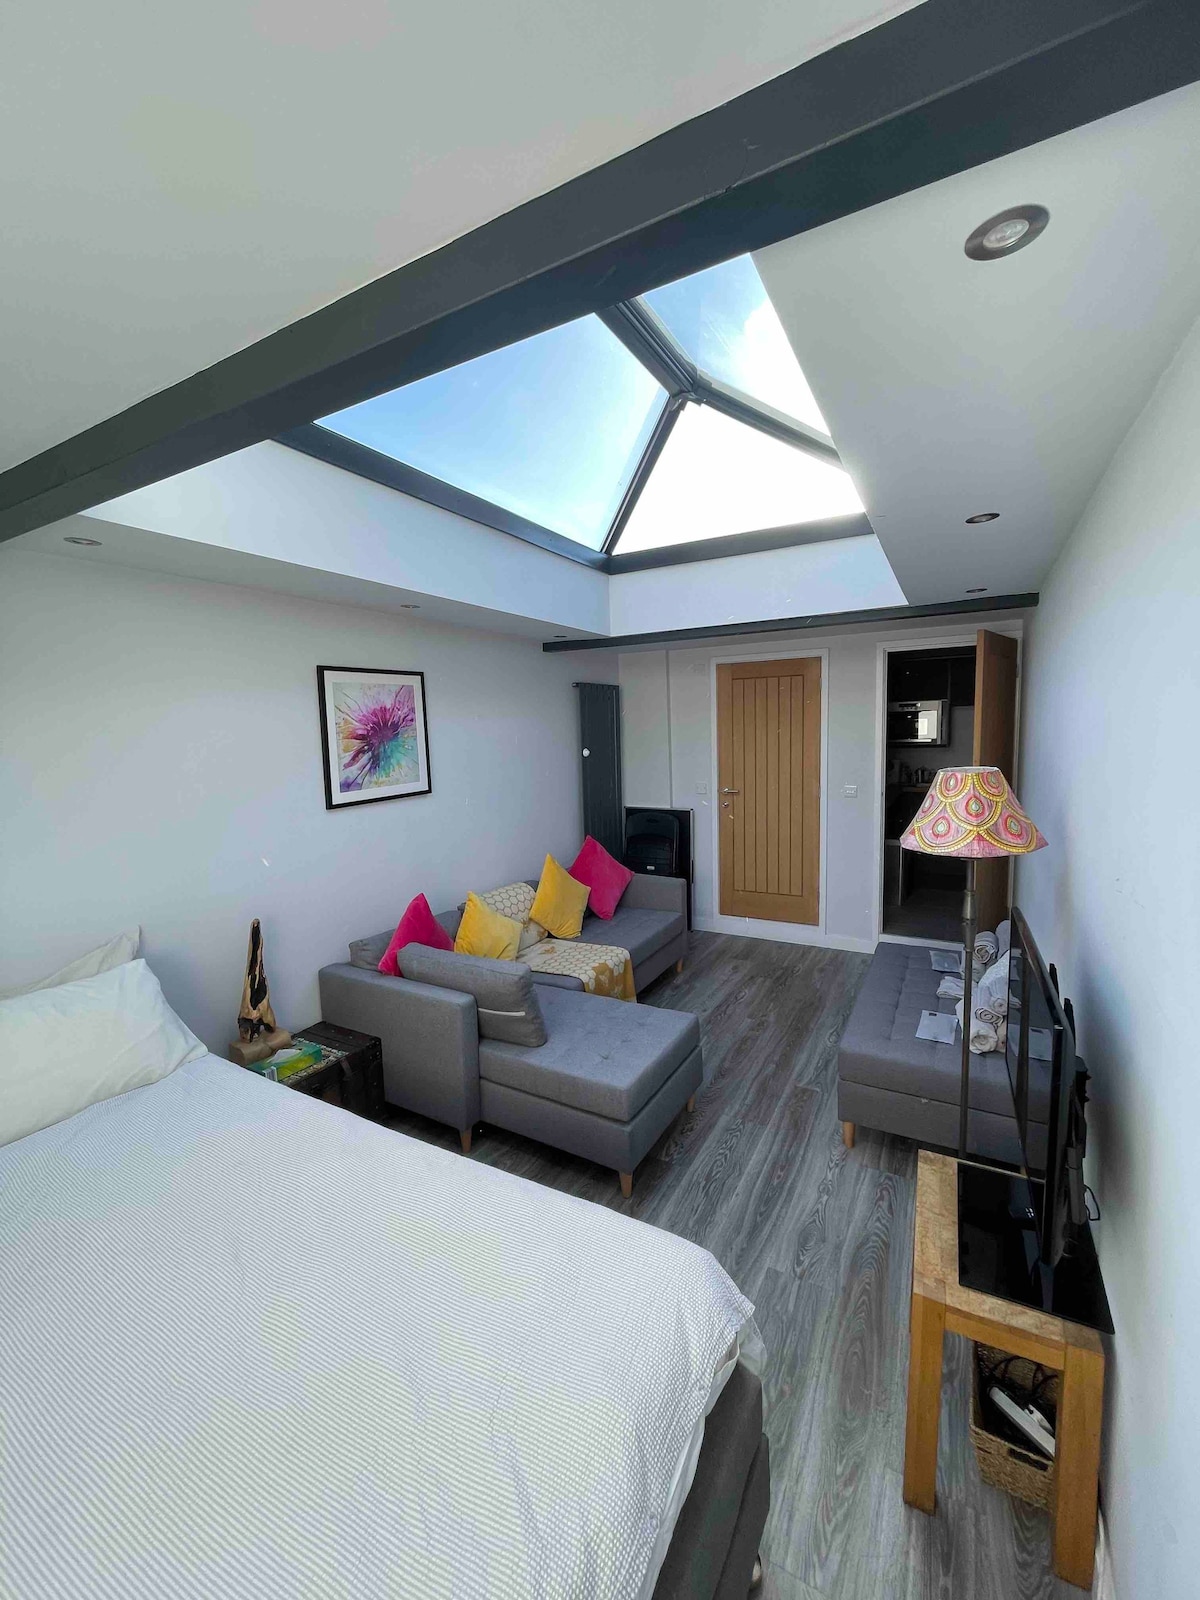 Glass roofed, private, romantic nook in Headingley